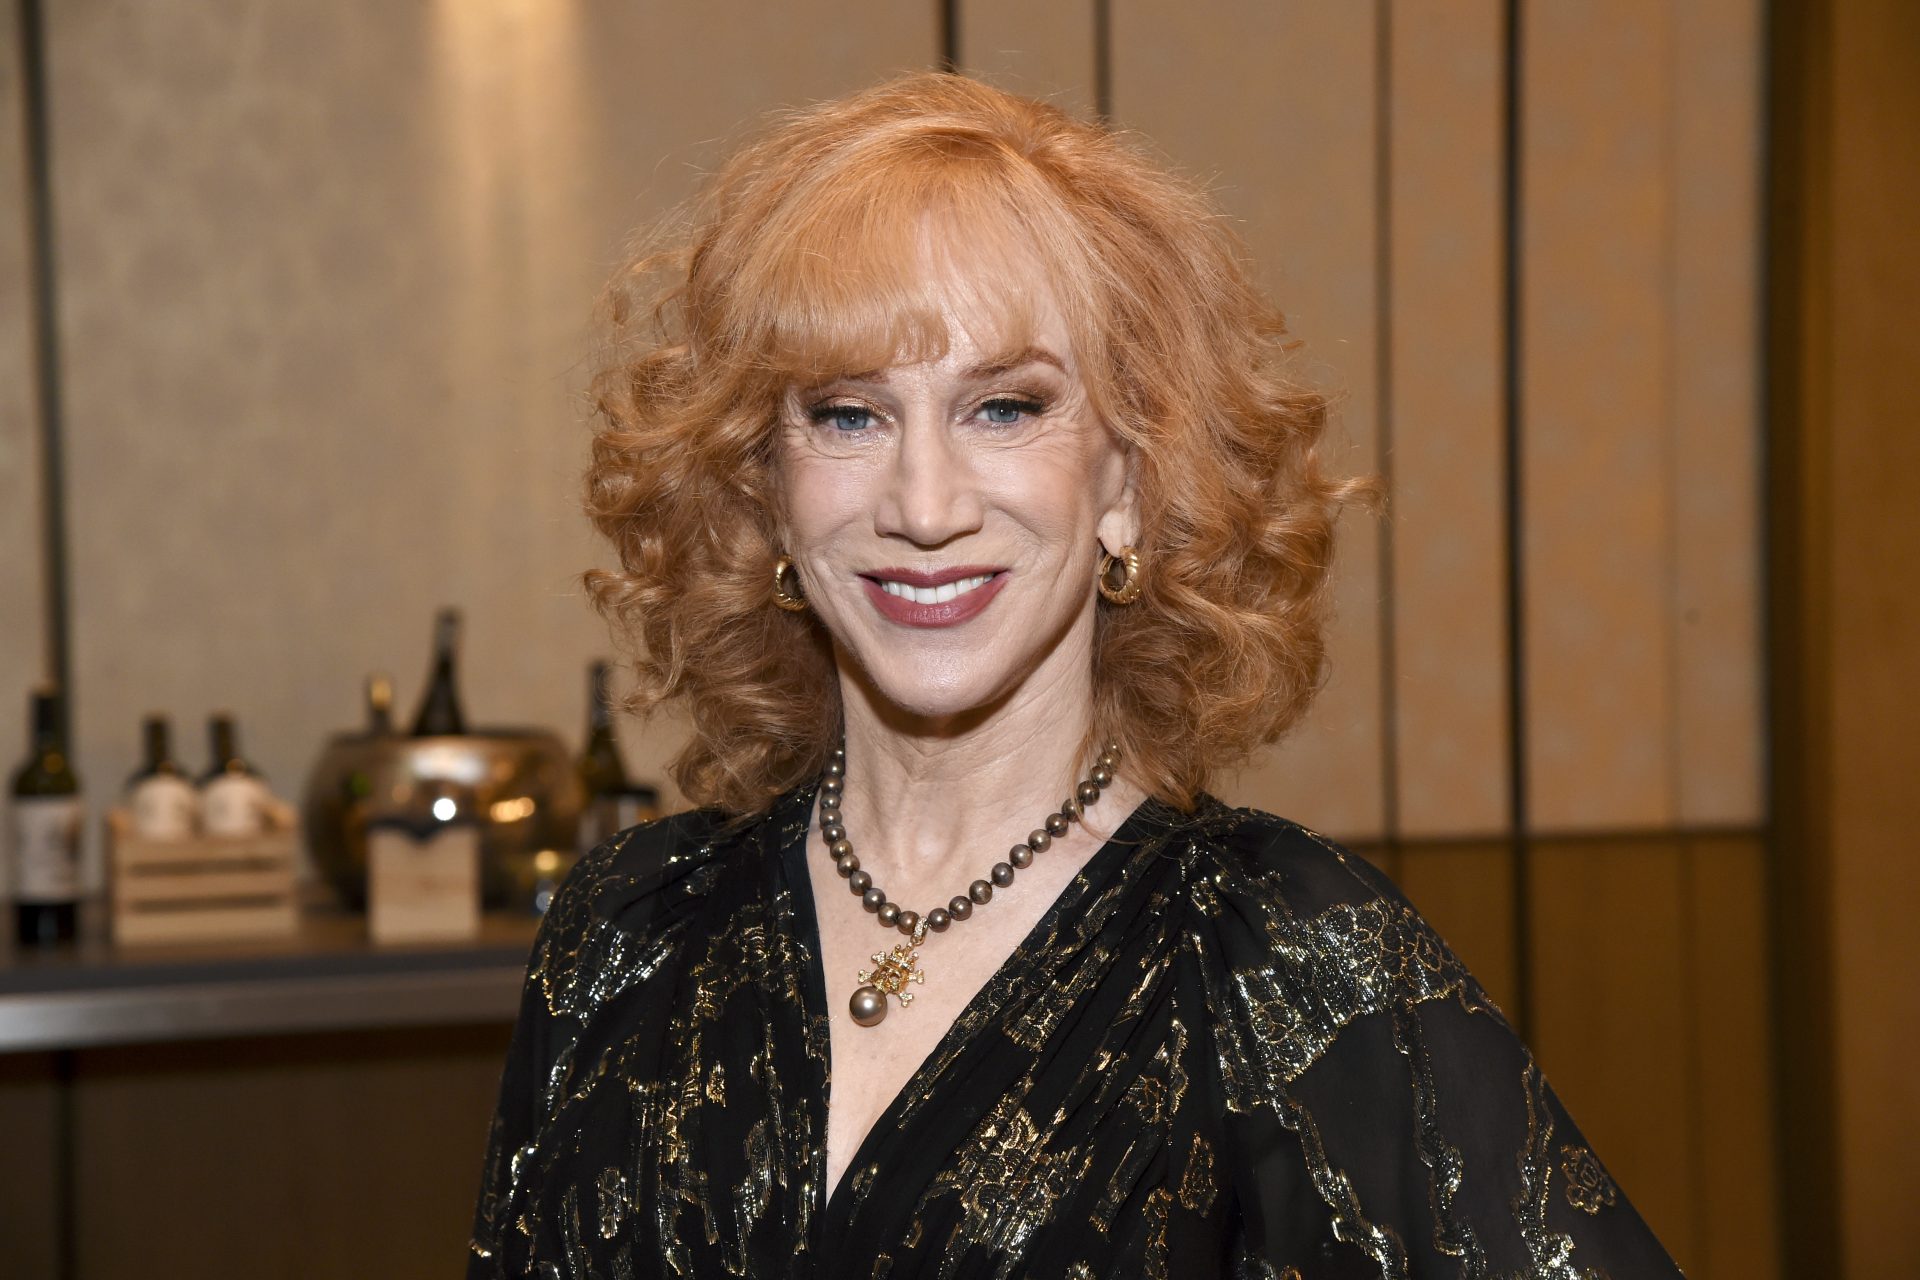 'Conspiracy to assassinate the president:' Kathy Griffin unaware 'how serious' case against her was